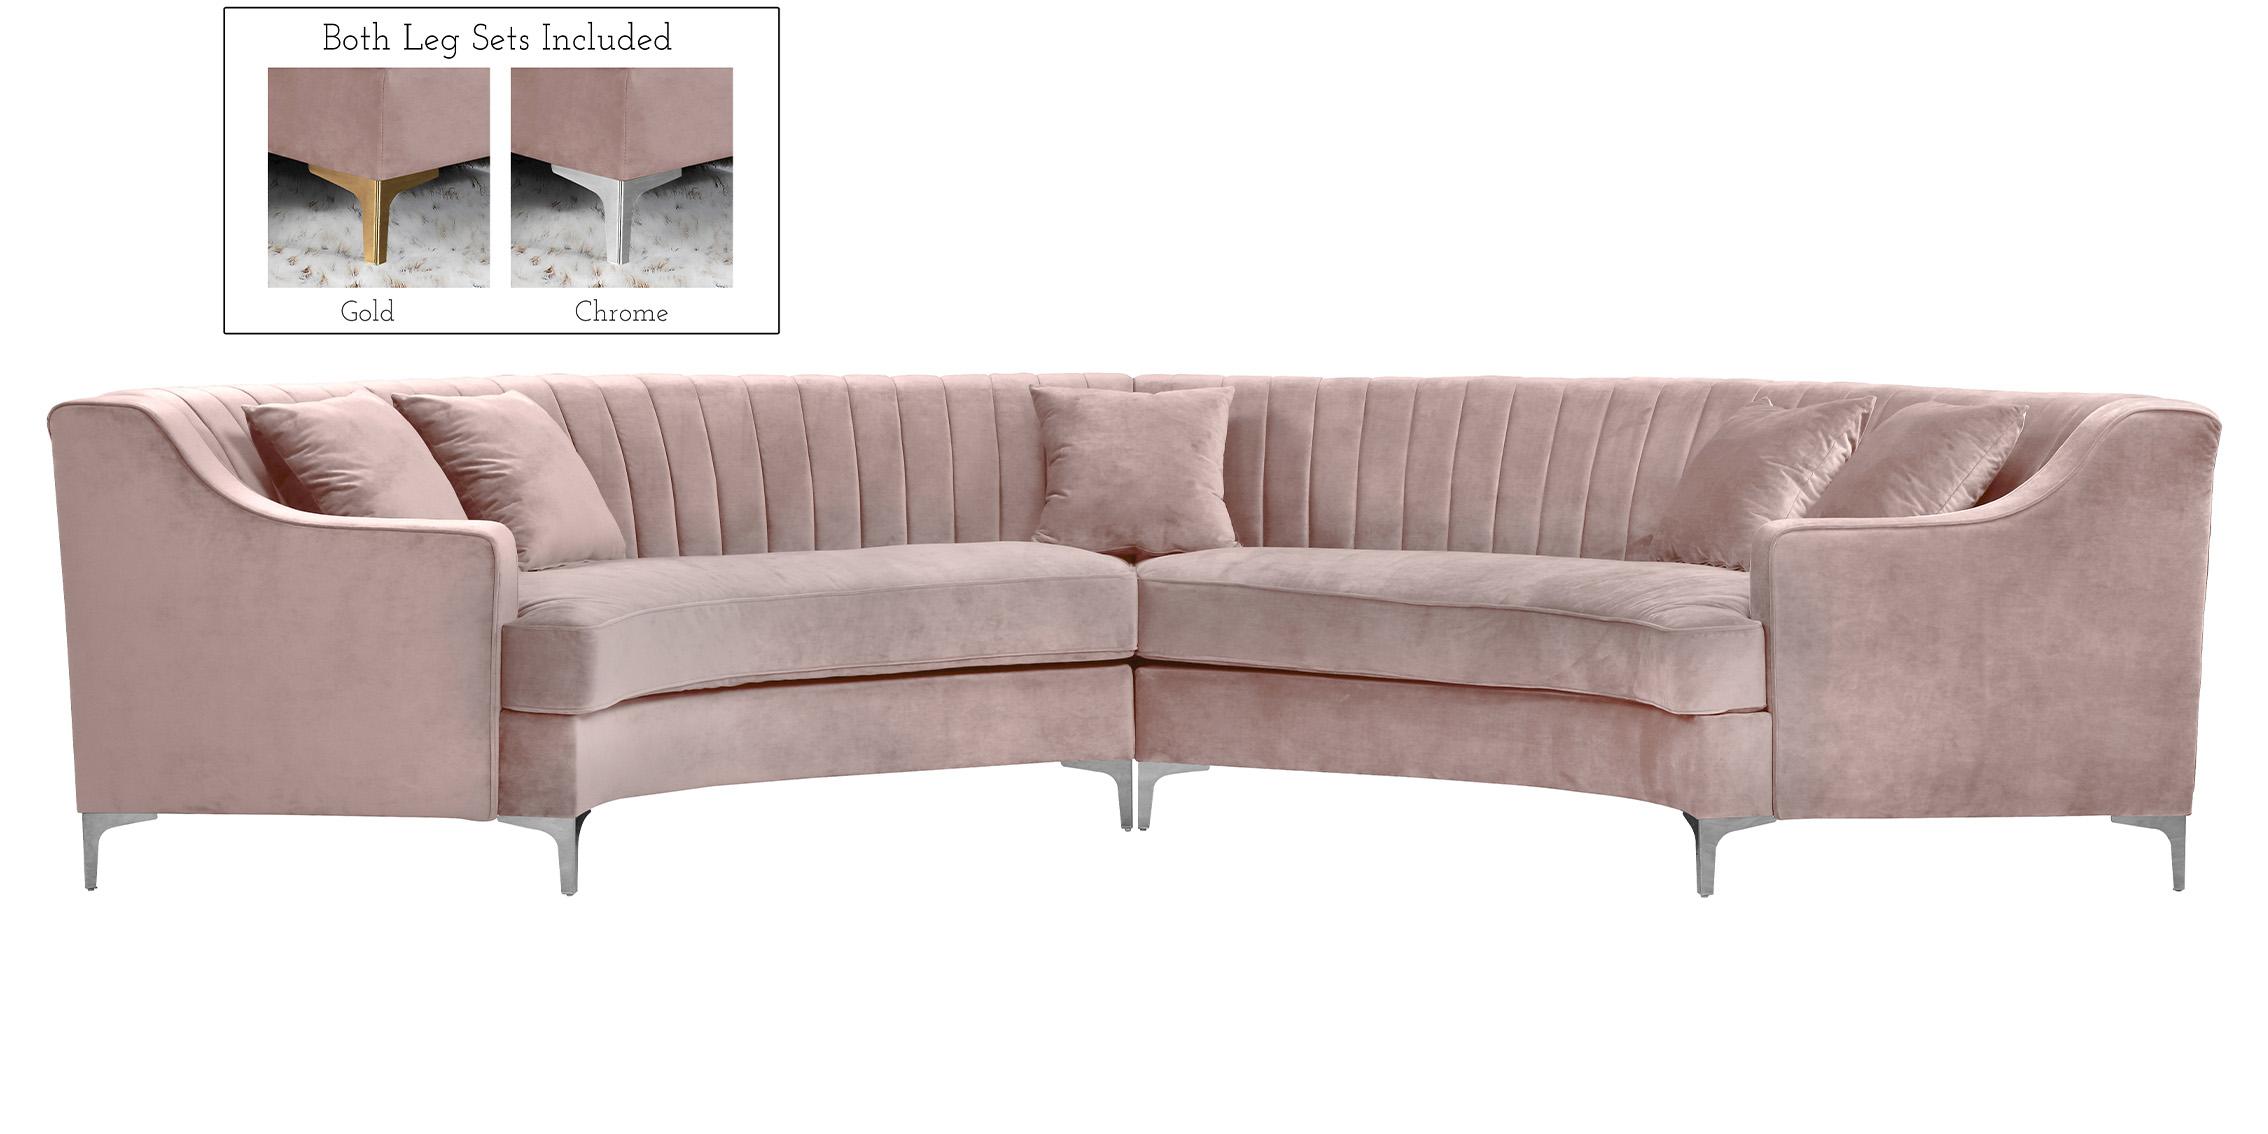 Contemporary, Modern Sectional Sofa JACKSON 673Pink 673Pink-Sectional in Pink Soft Velvet